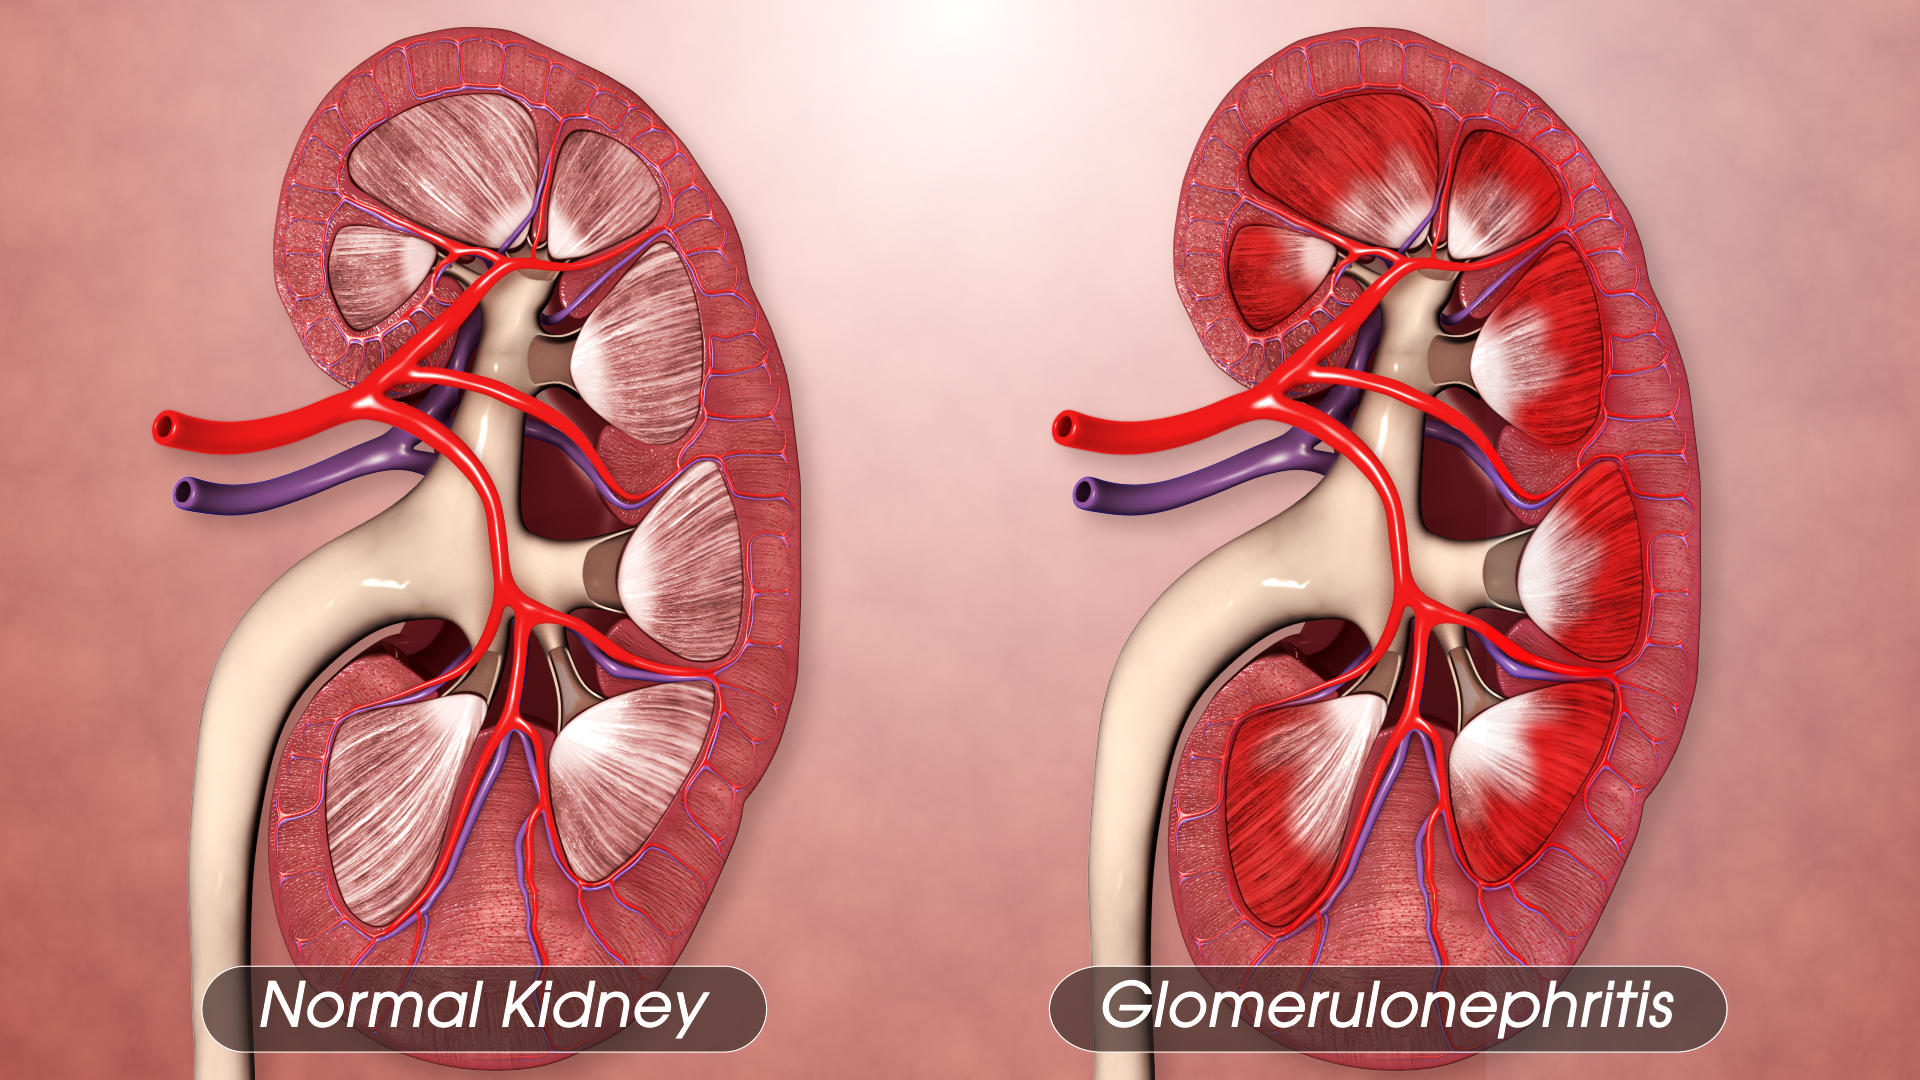 Glomerulonephritis: Symptoms, Causes, and Treatment - Scientific Animations